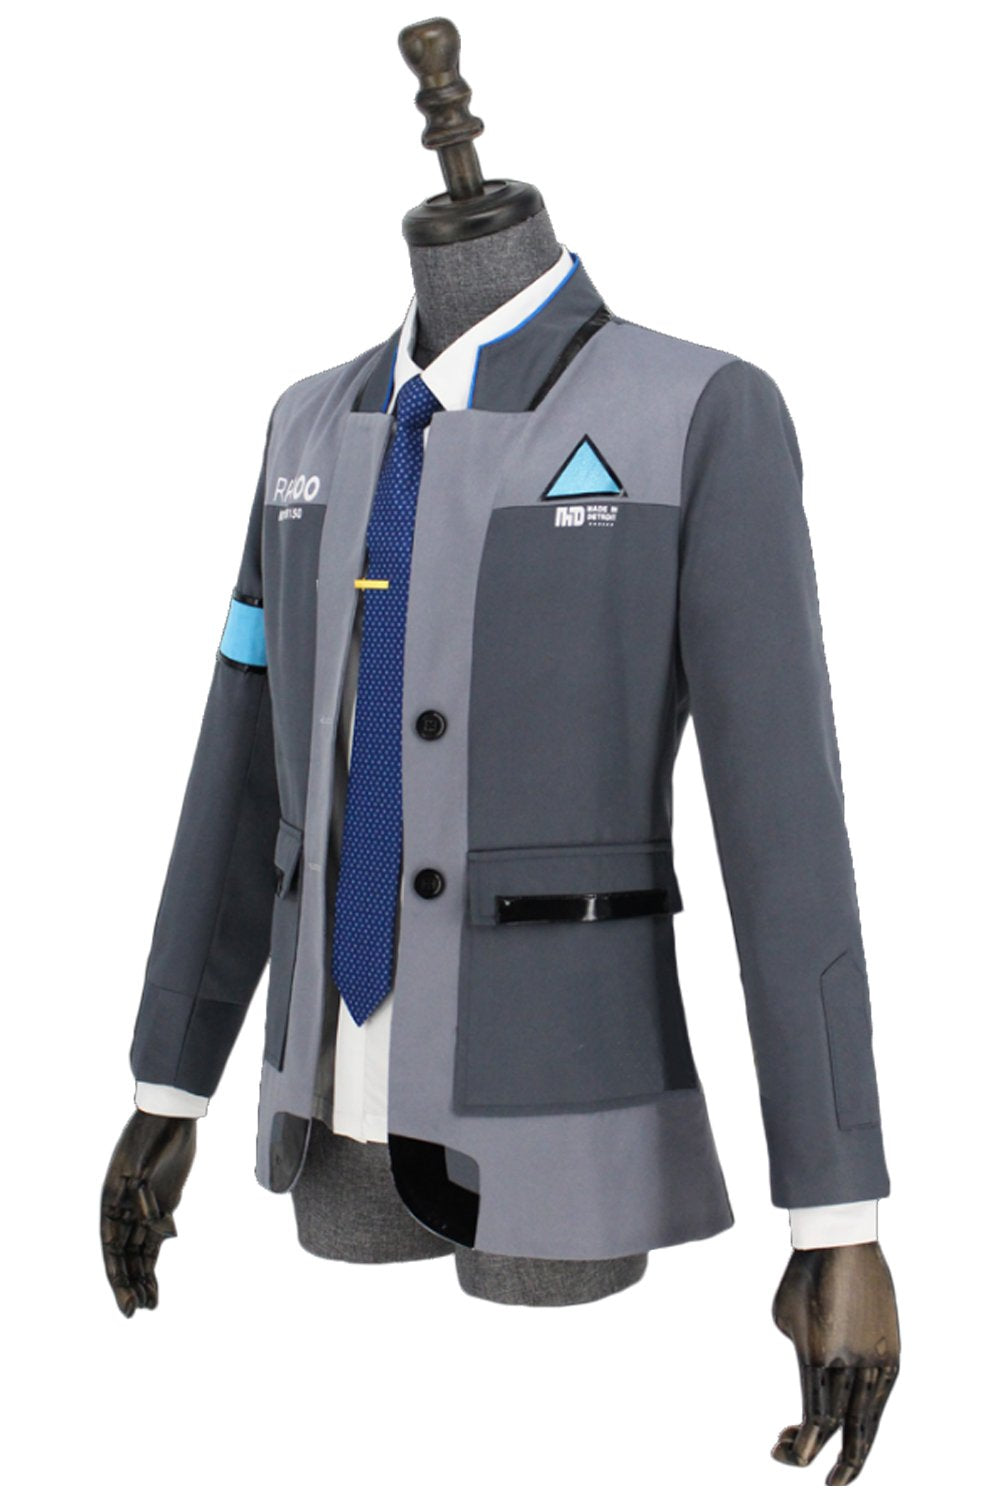 Detroit: Become Human Connor RK800 Agent Suit Uniform Tight Unifrom Cosplay Costume Halloween